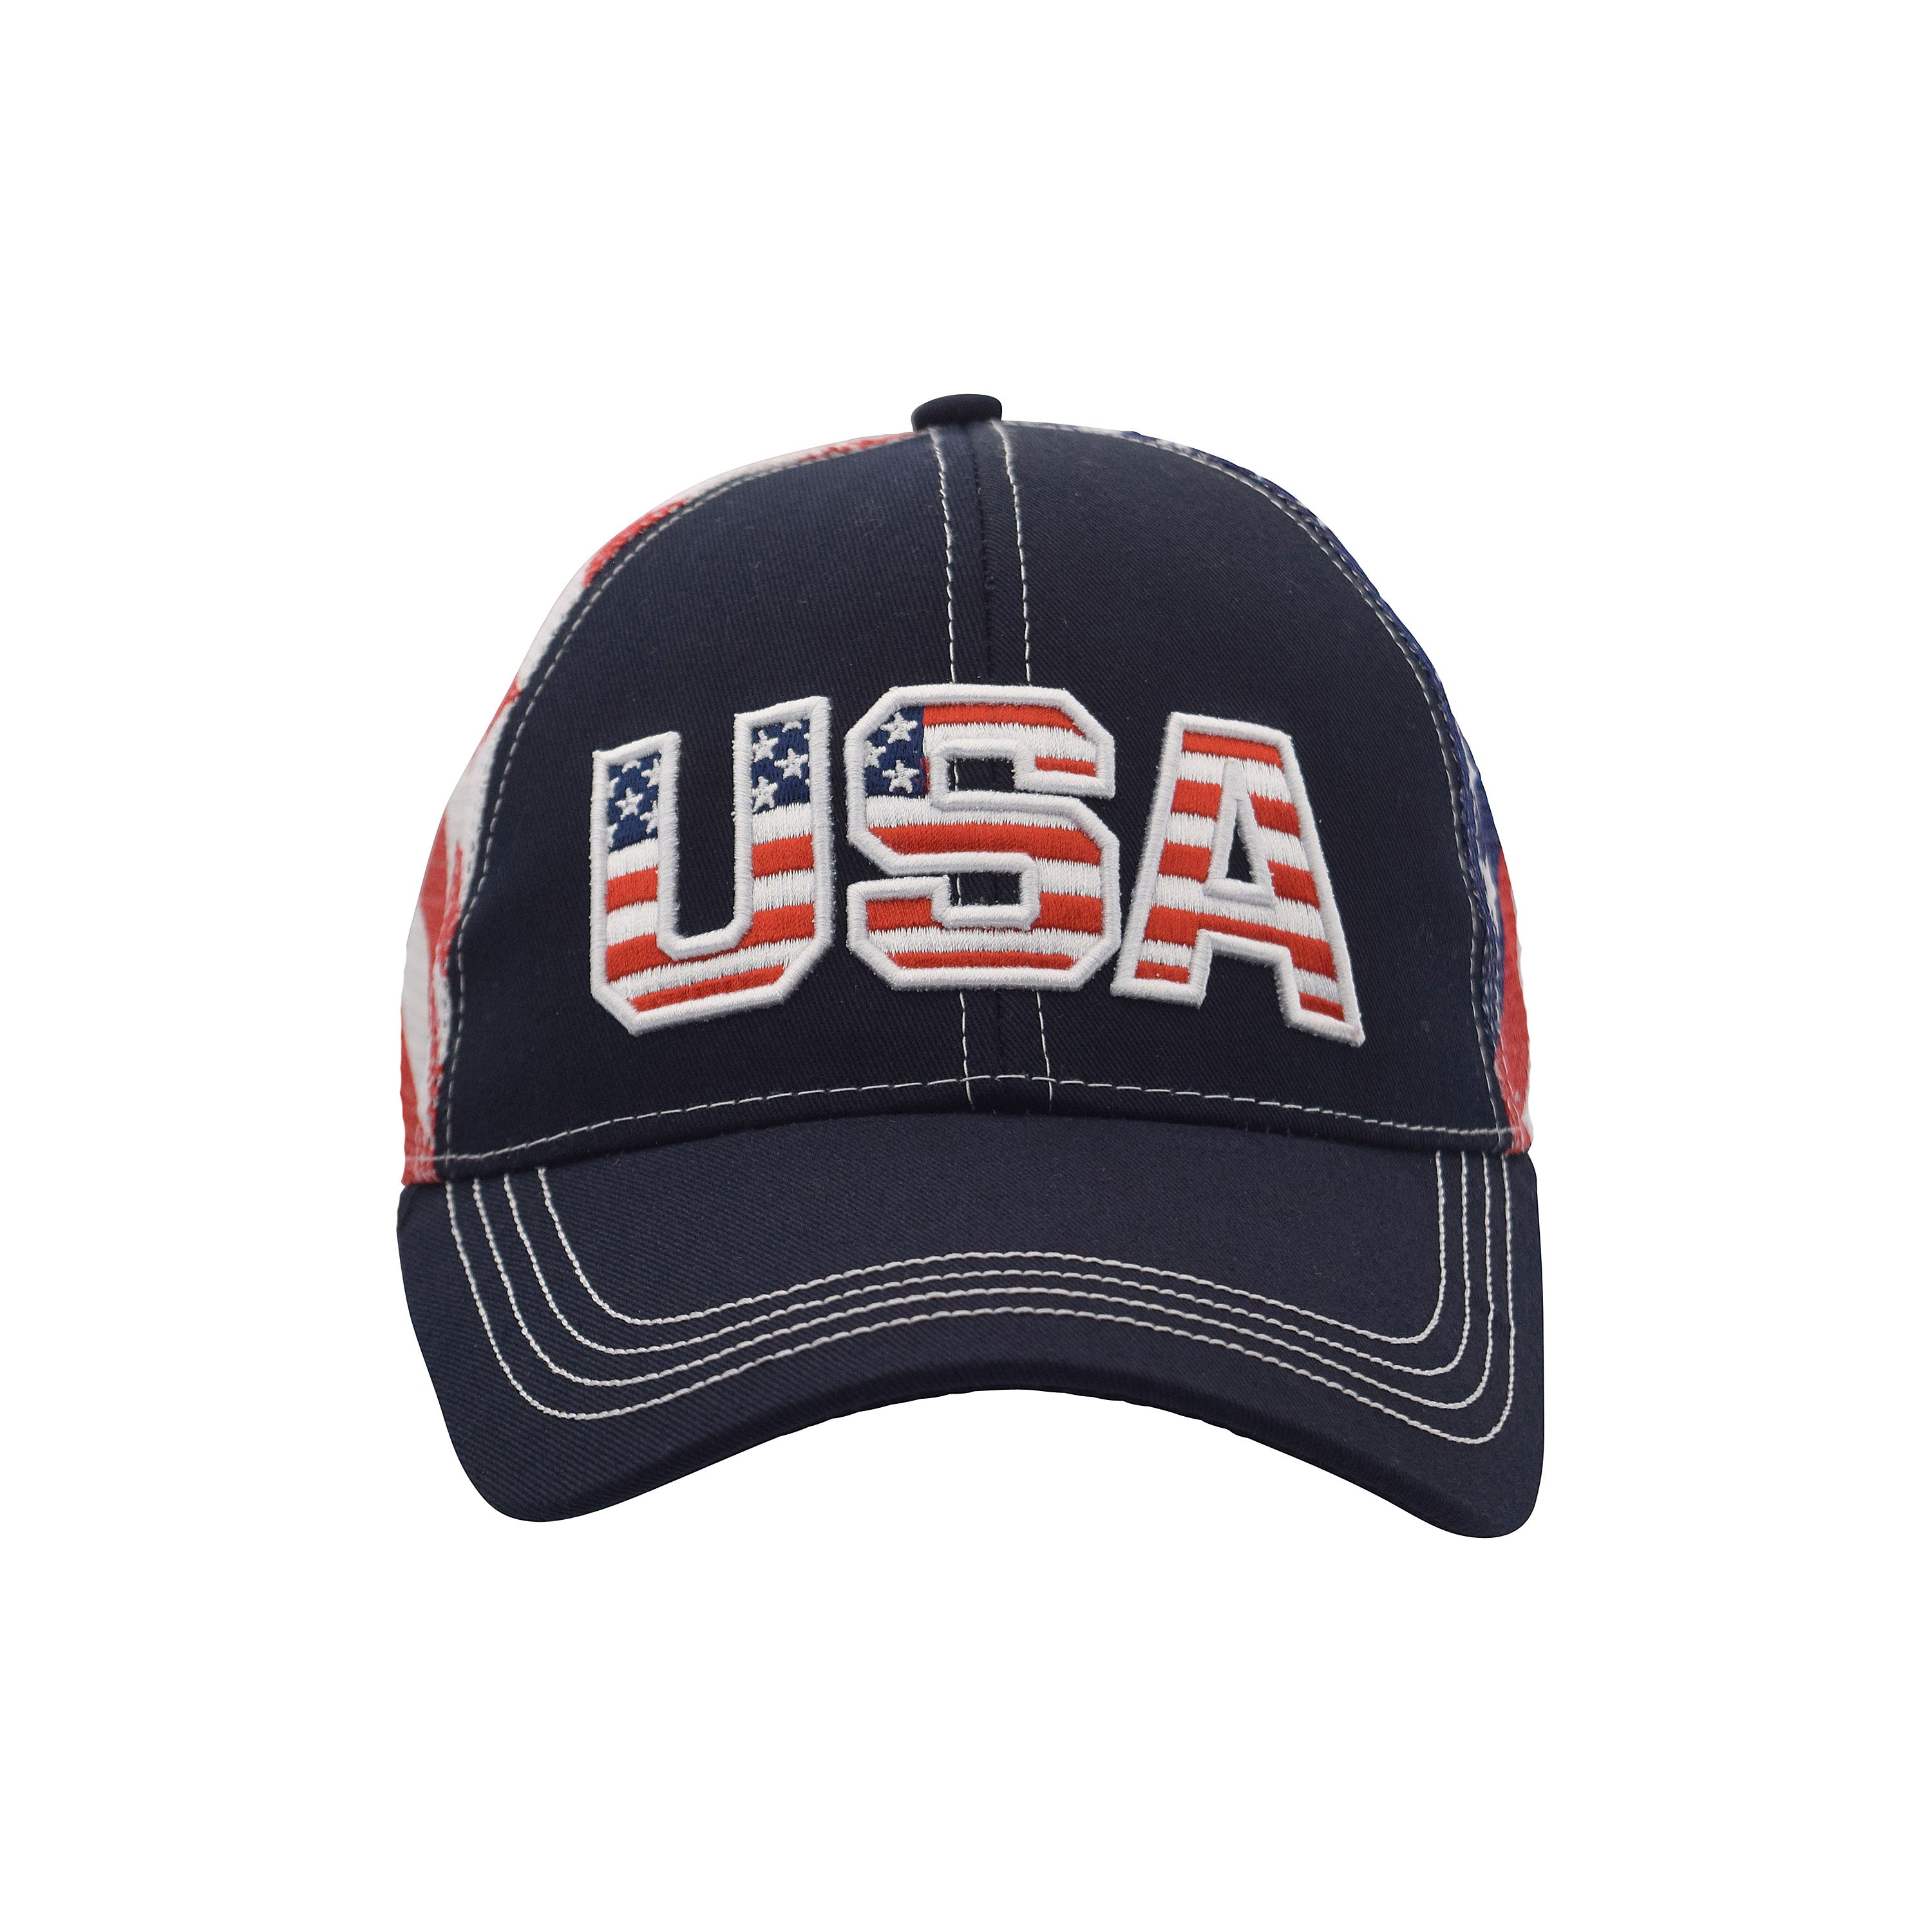 S73 - USA Flag Cap - Relaxed Ripstop - Cotton - Black 